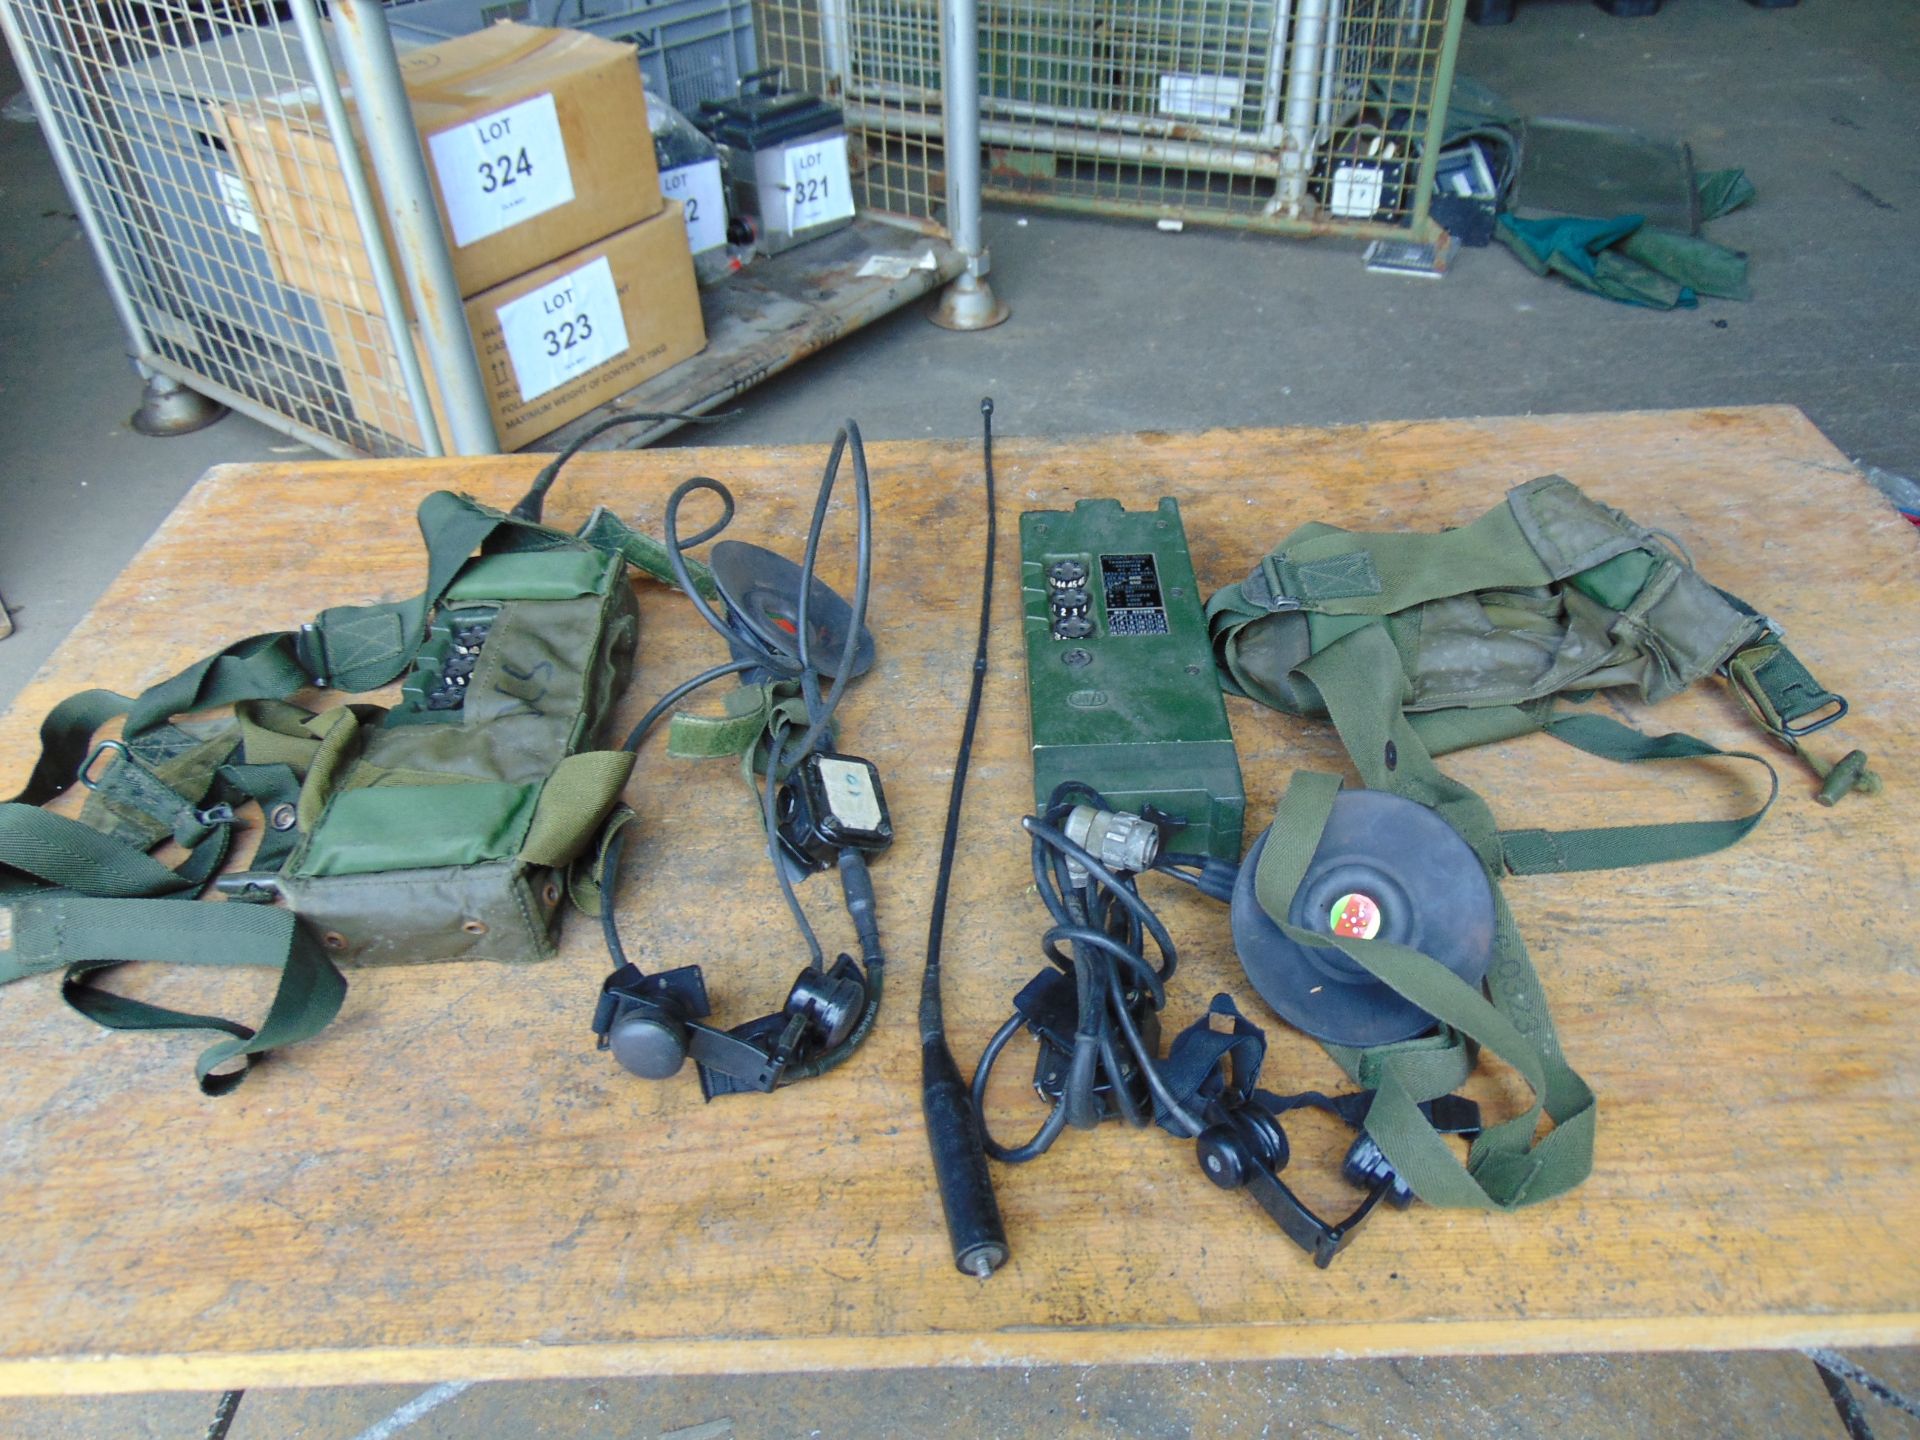 2 x RT 349 British Army Transmitter / Receiver c/w Pouch, Headset, Antenna and Battery Cassette - Image 2 of 5